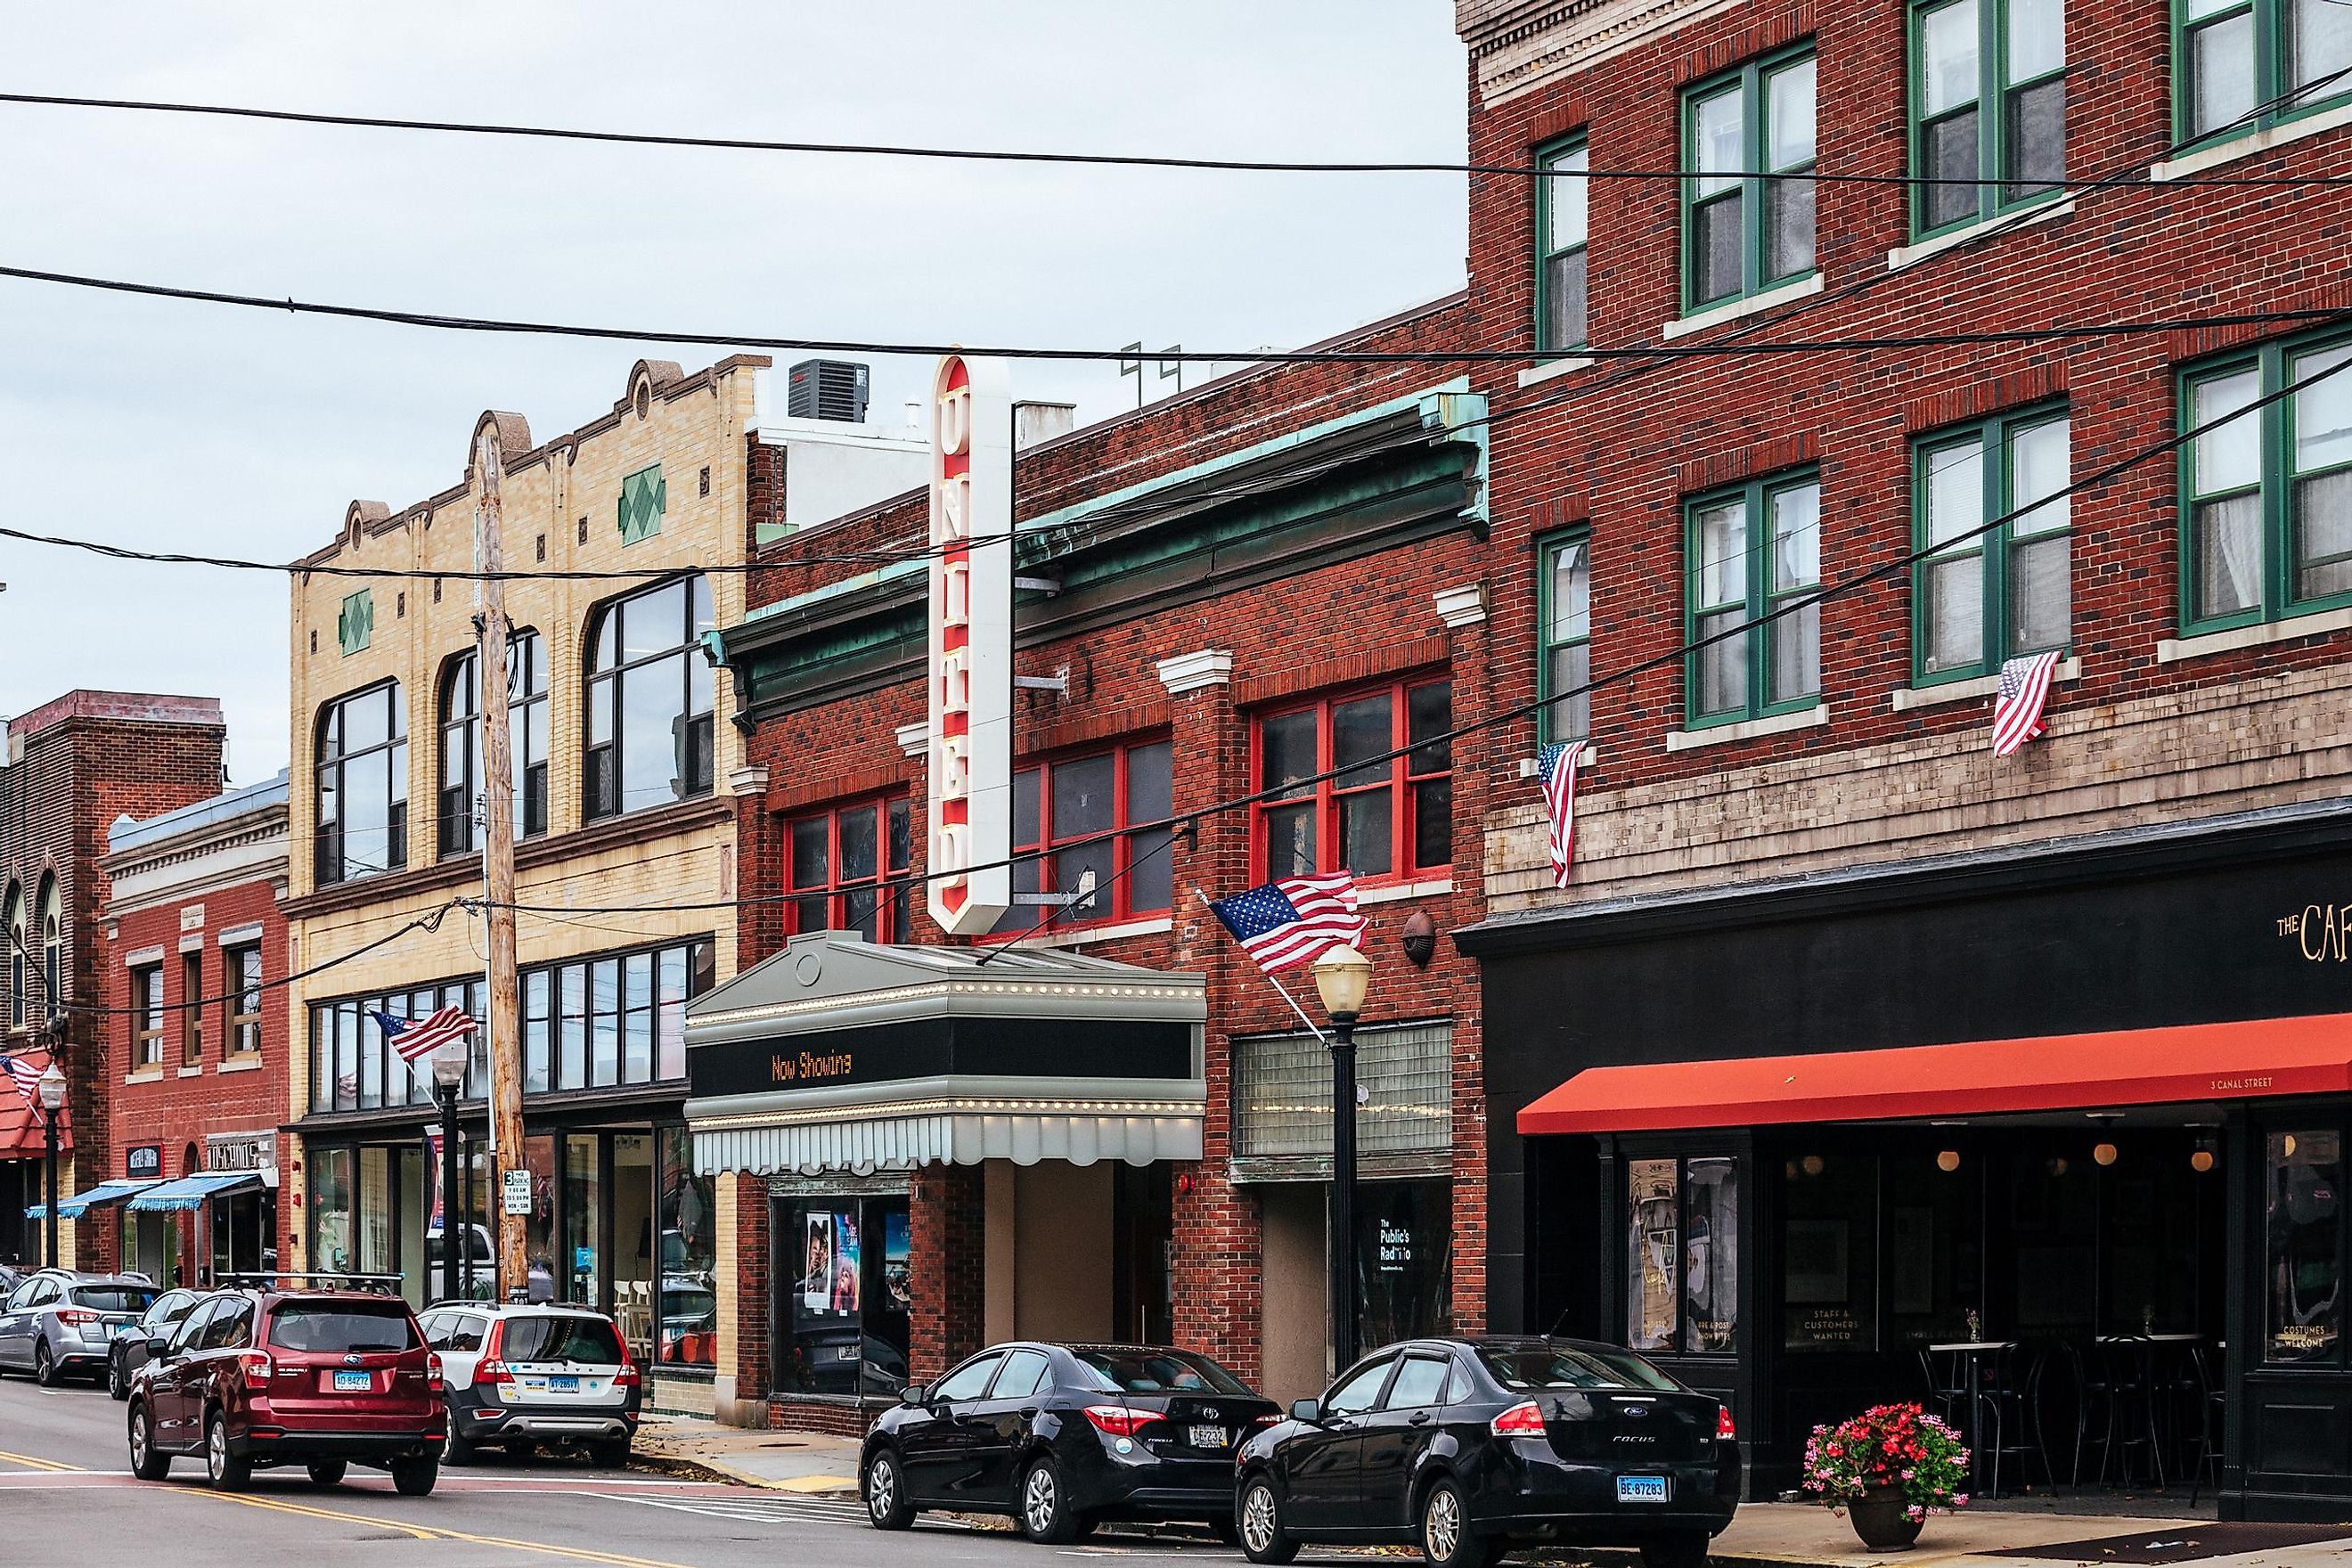 Westerly, Rhode Island: High Street with colourful buildings and a few people. via peeterv / iStock.com